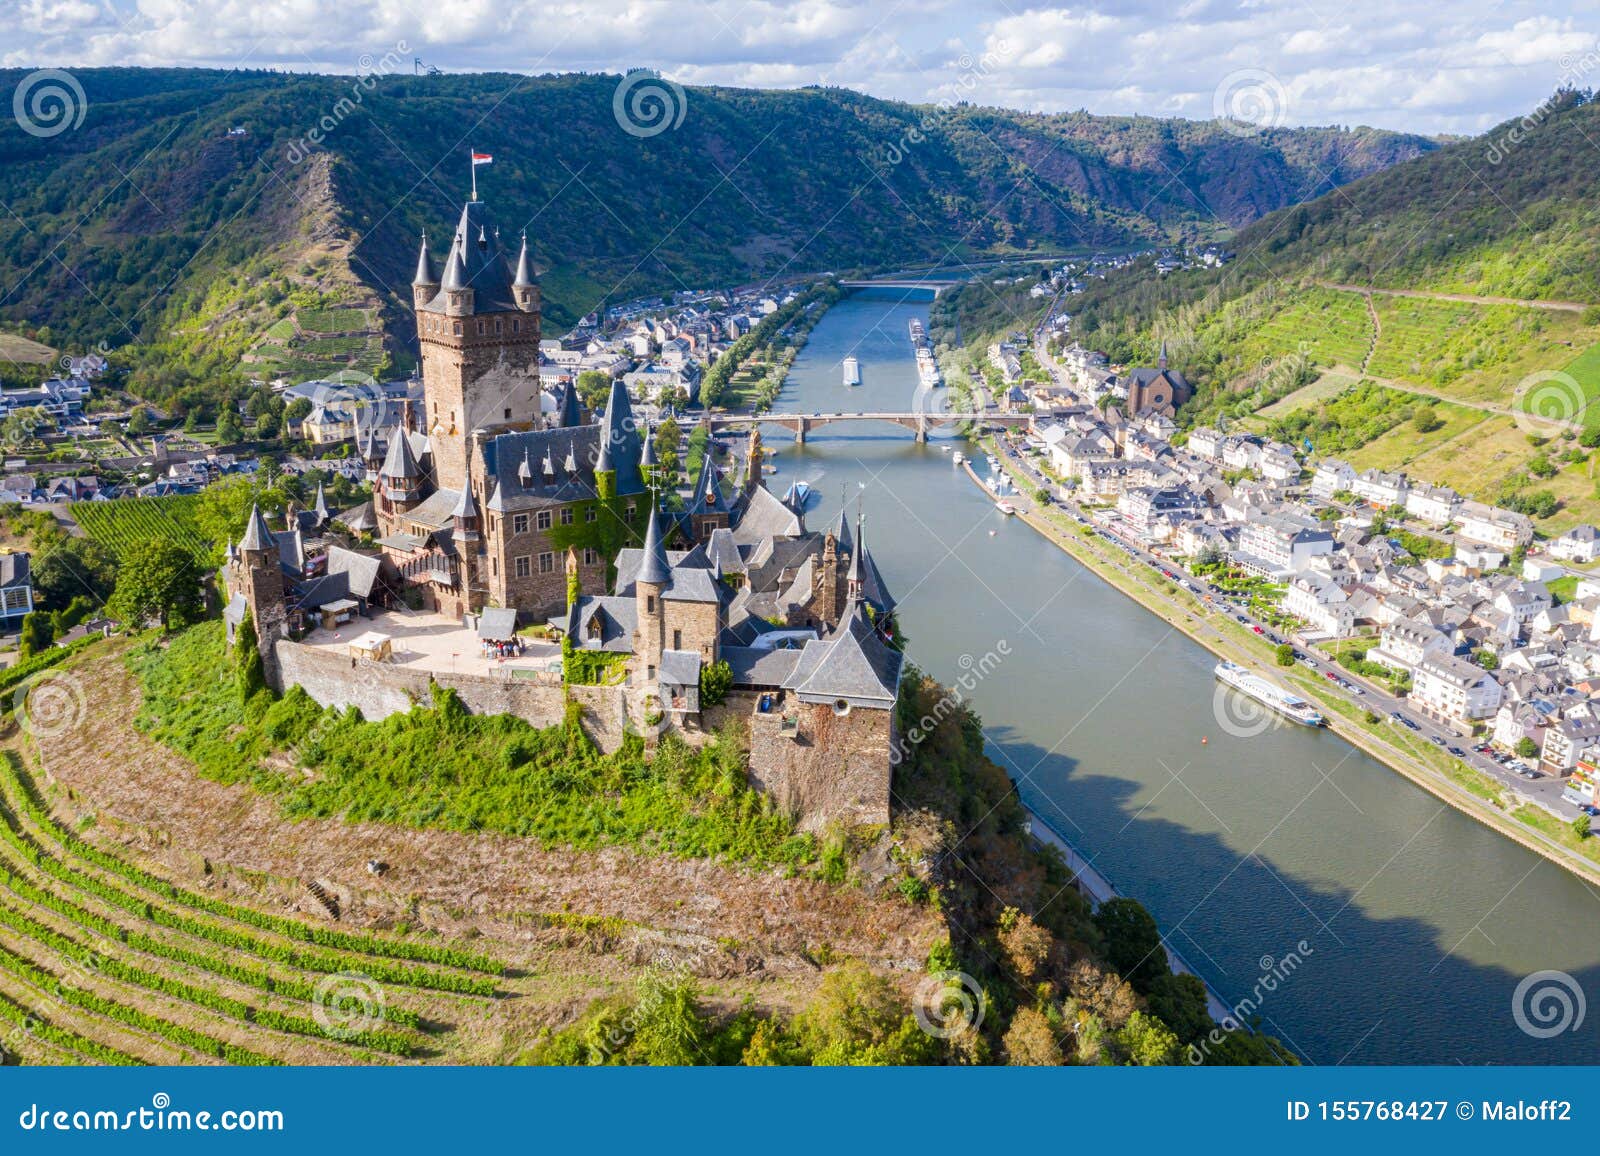 cochem imperial castle, reichsburg cochem, gothic revival style, cochem town, moselle river, rhineland-palatinate, germany.